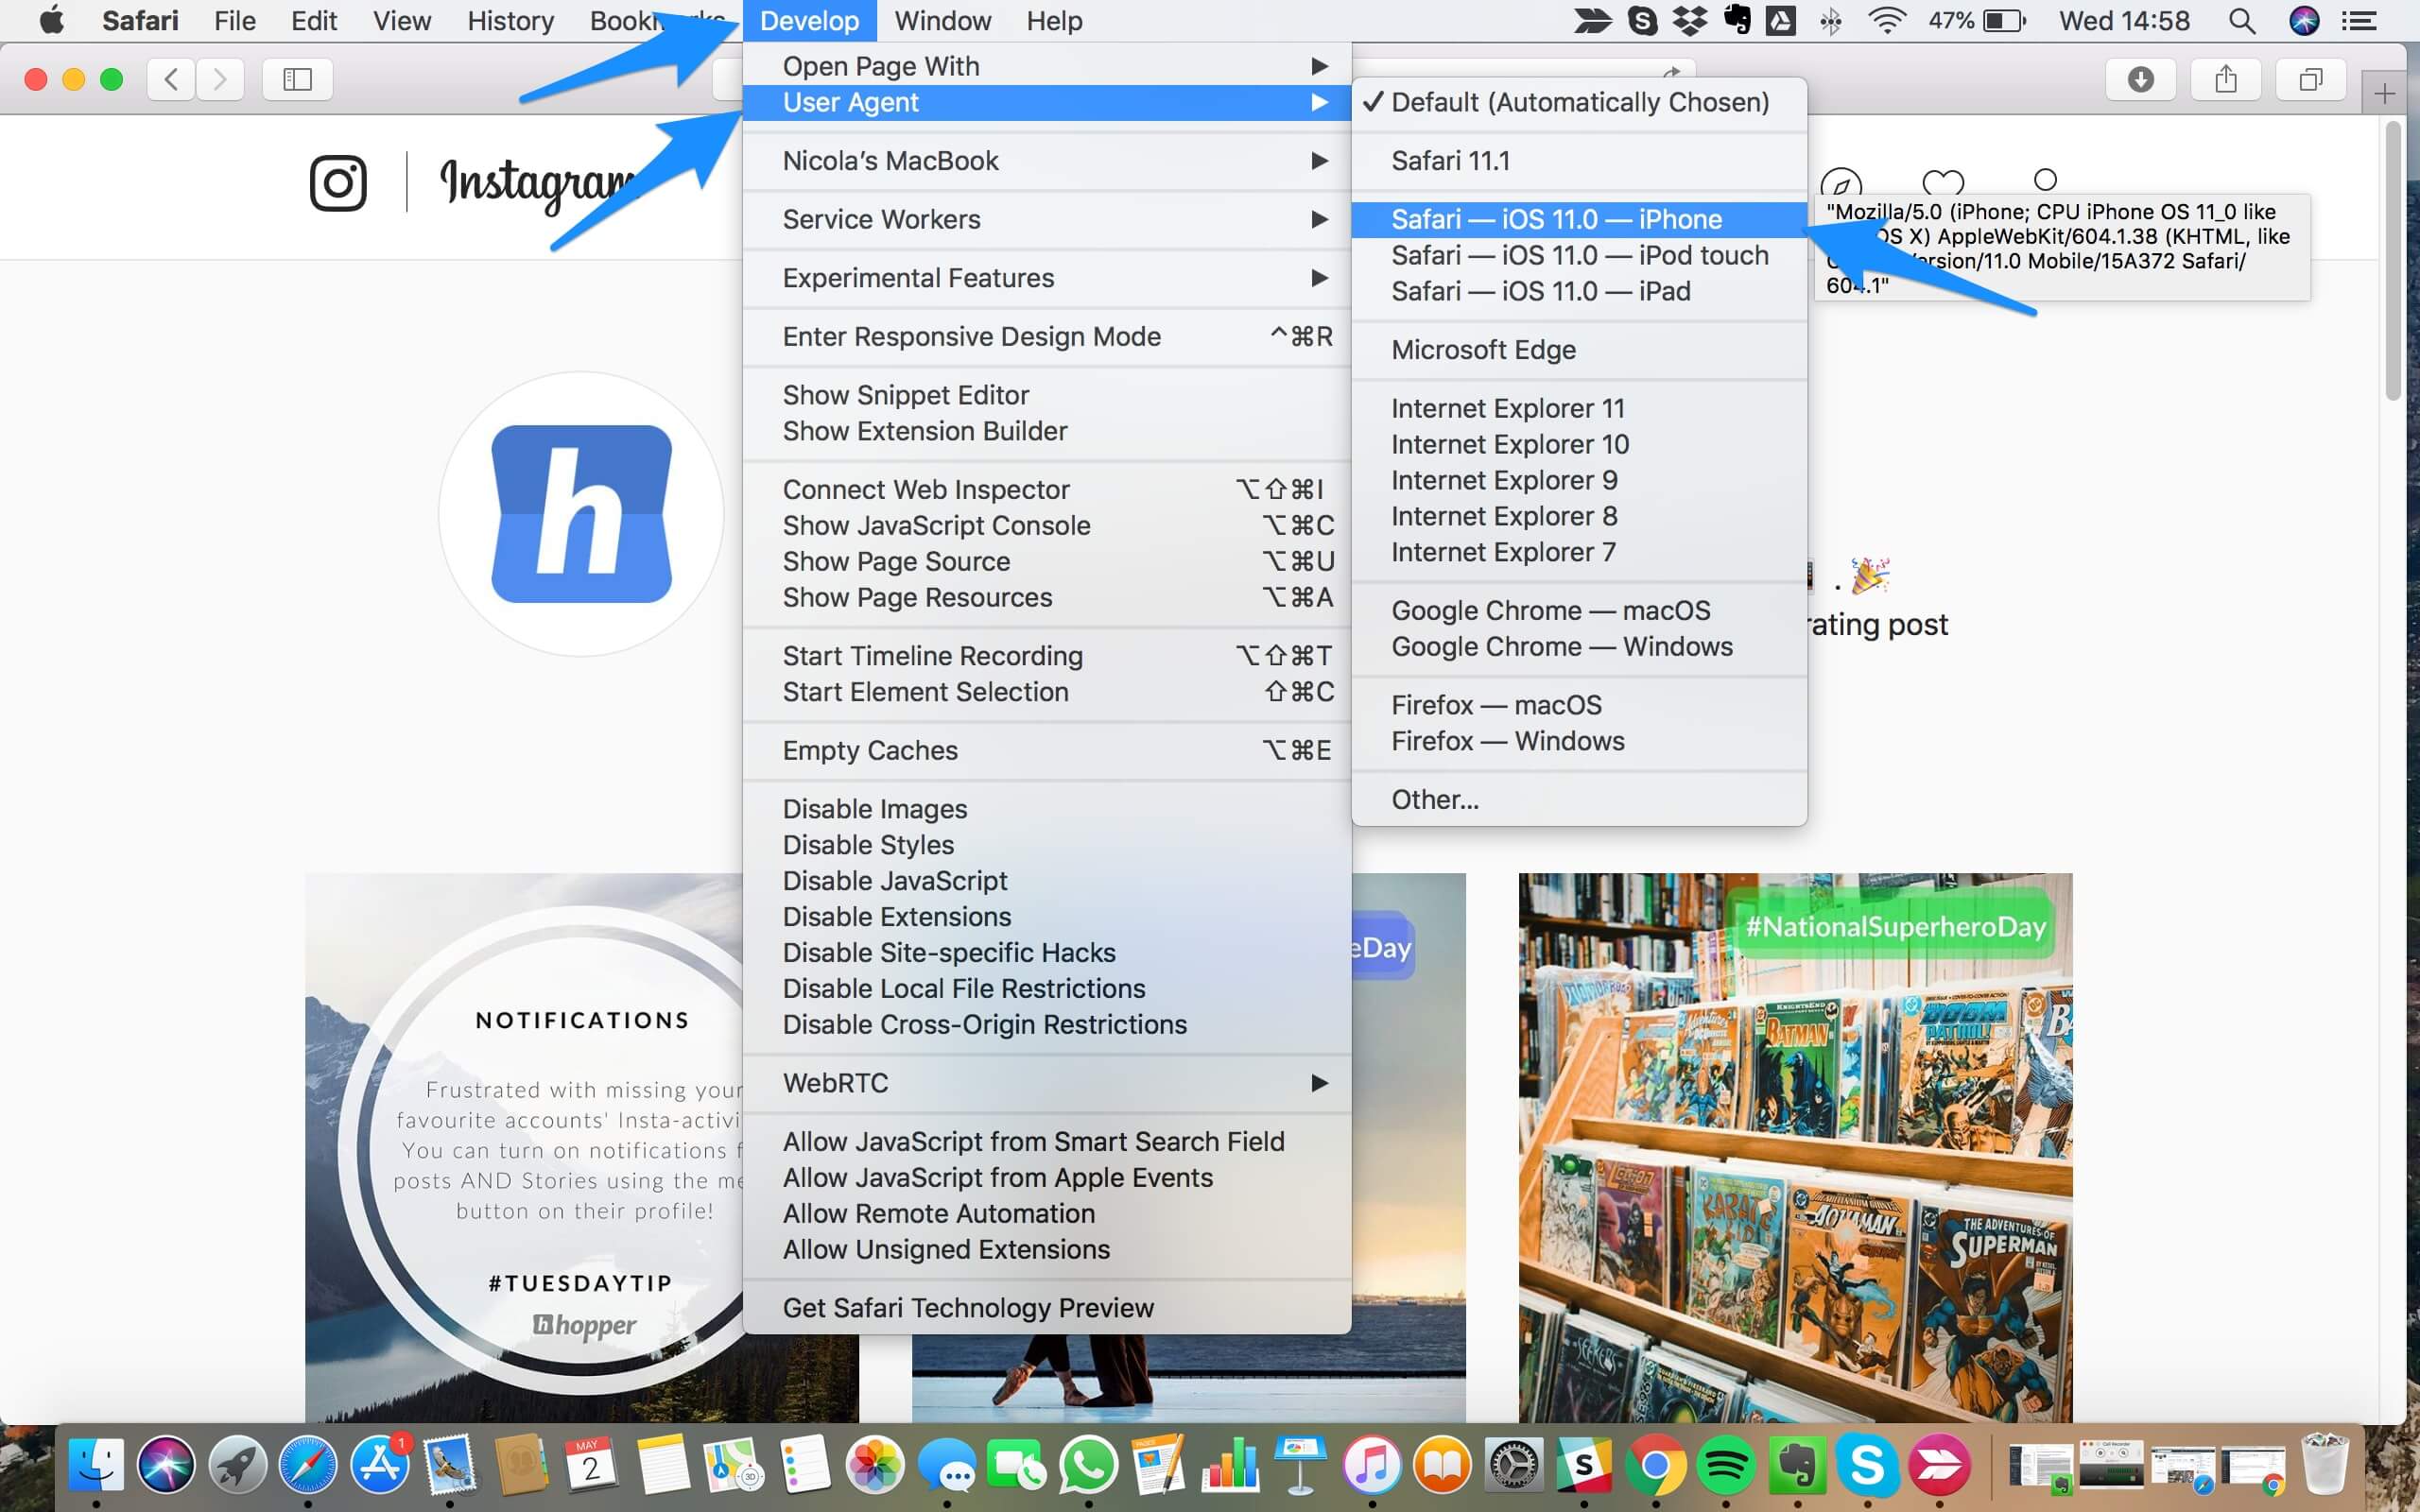 How to switch the user agent in Safari